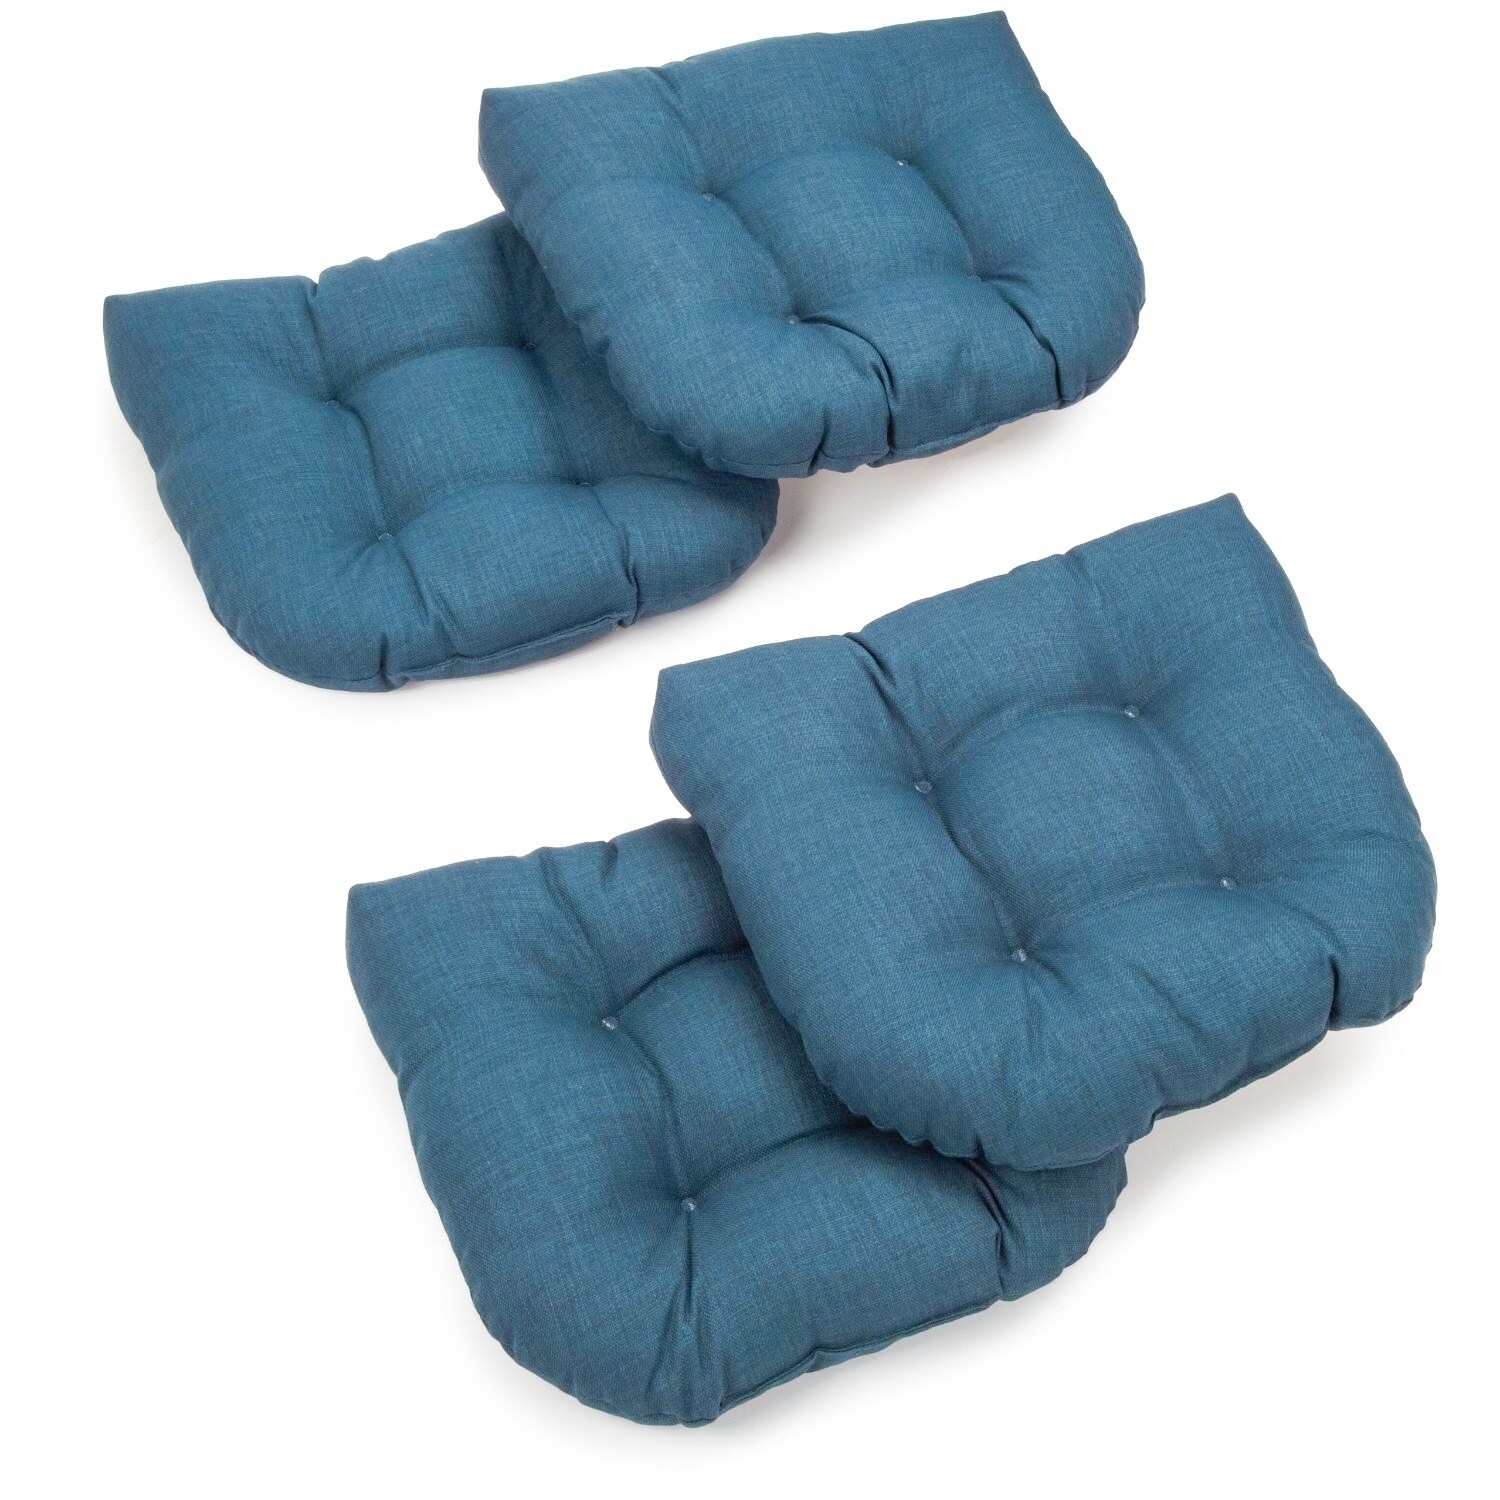 Blazing Needles 16-Inch Solid Twill U-shaped Chair Cushions (Set of 4) -  Aqua Blue, Indoor Cushions, Tufted Design, Made in USA